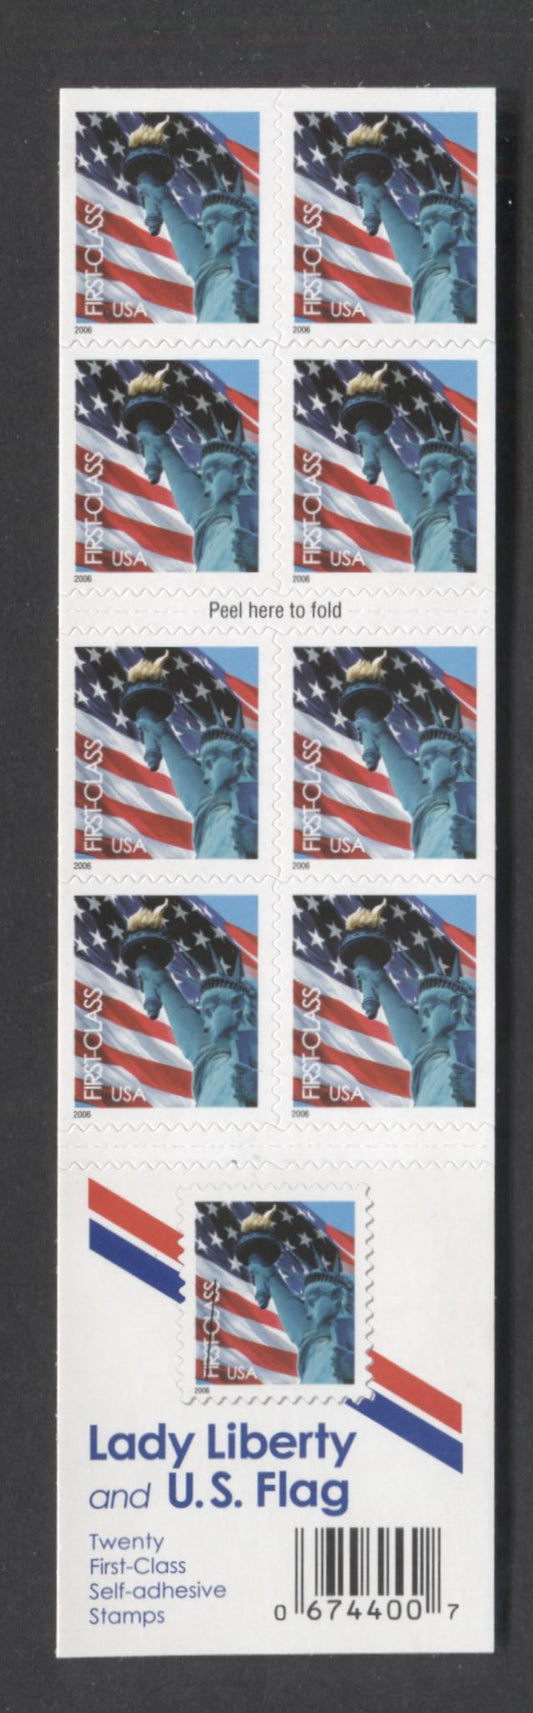 Lot 200 United States SC#3966a 37c Multicolored 2005 Flag & Statue Of Liberty Issue, Double-Sided Booklet, A VFNH Booklet Of 20, Click on Listing to See ALL Pictures, 2017 Scott Cat. $16